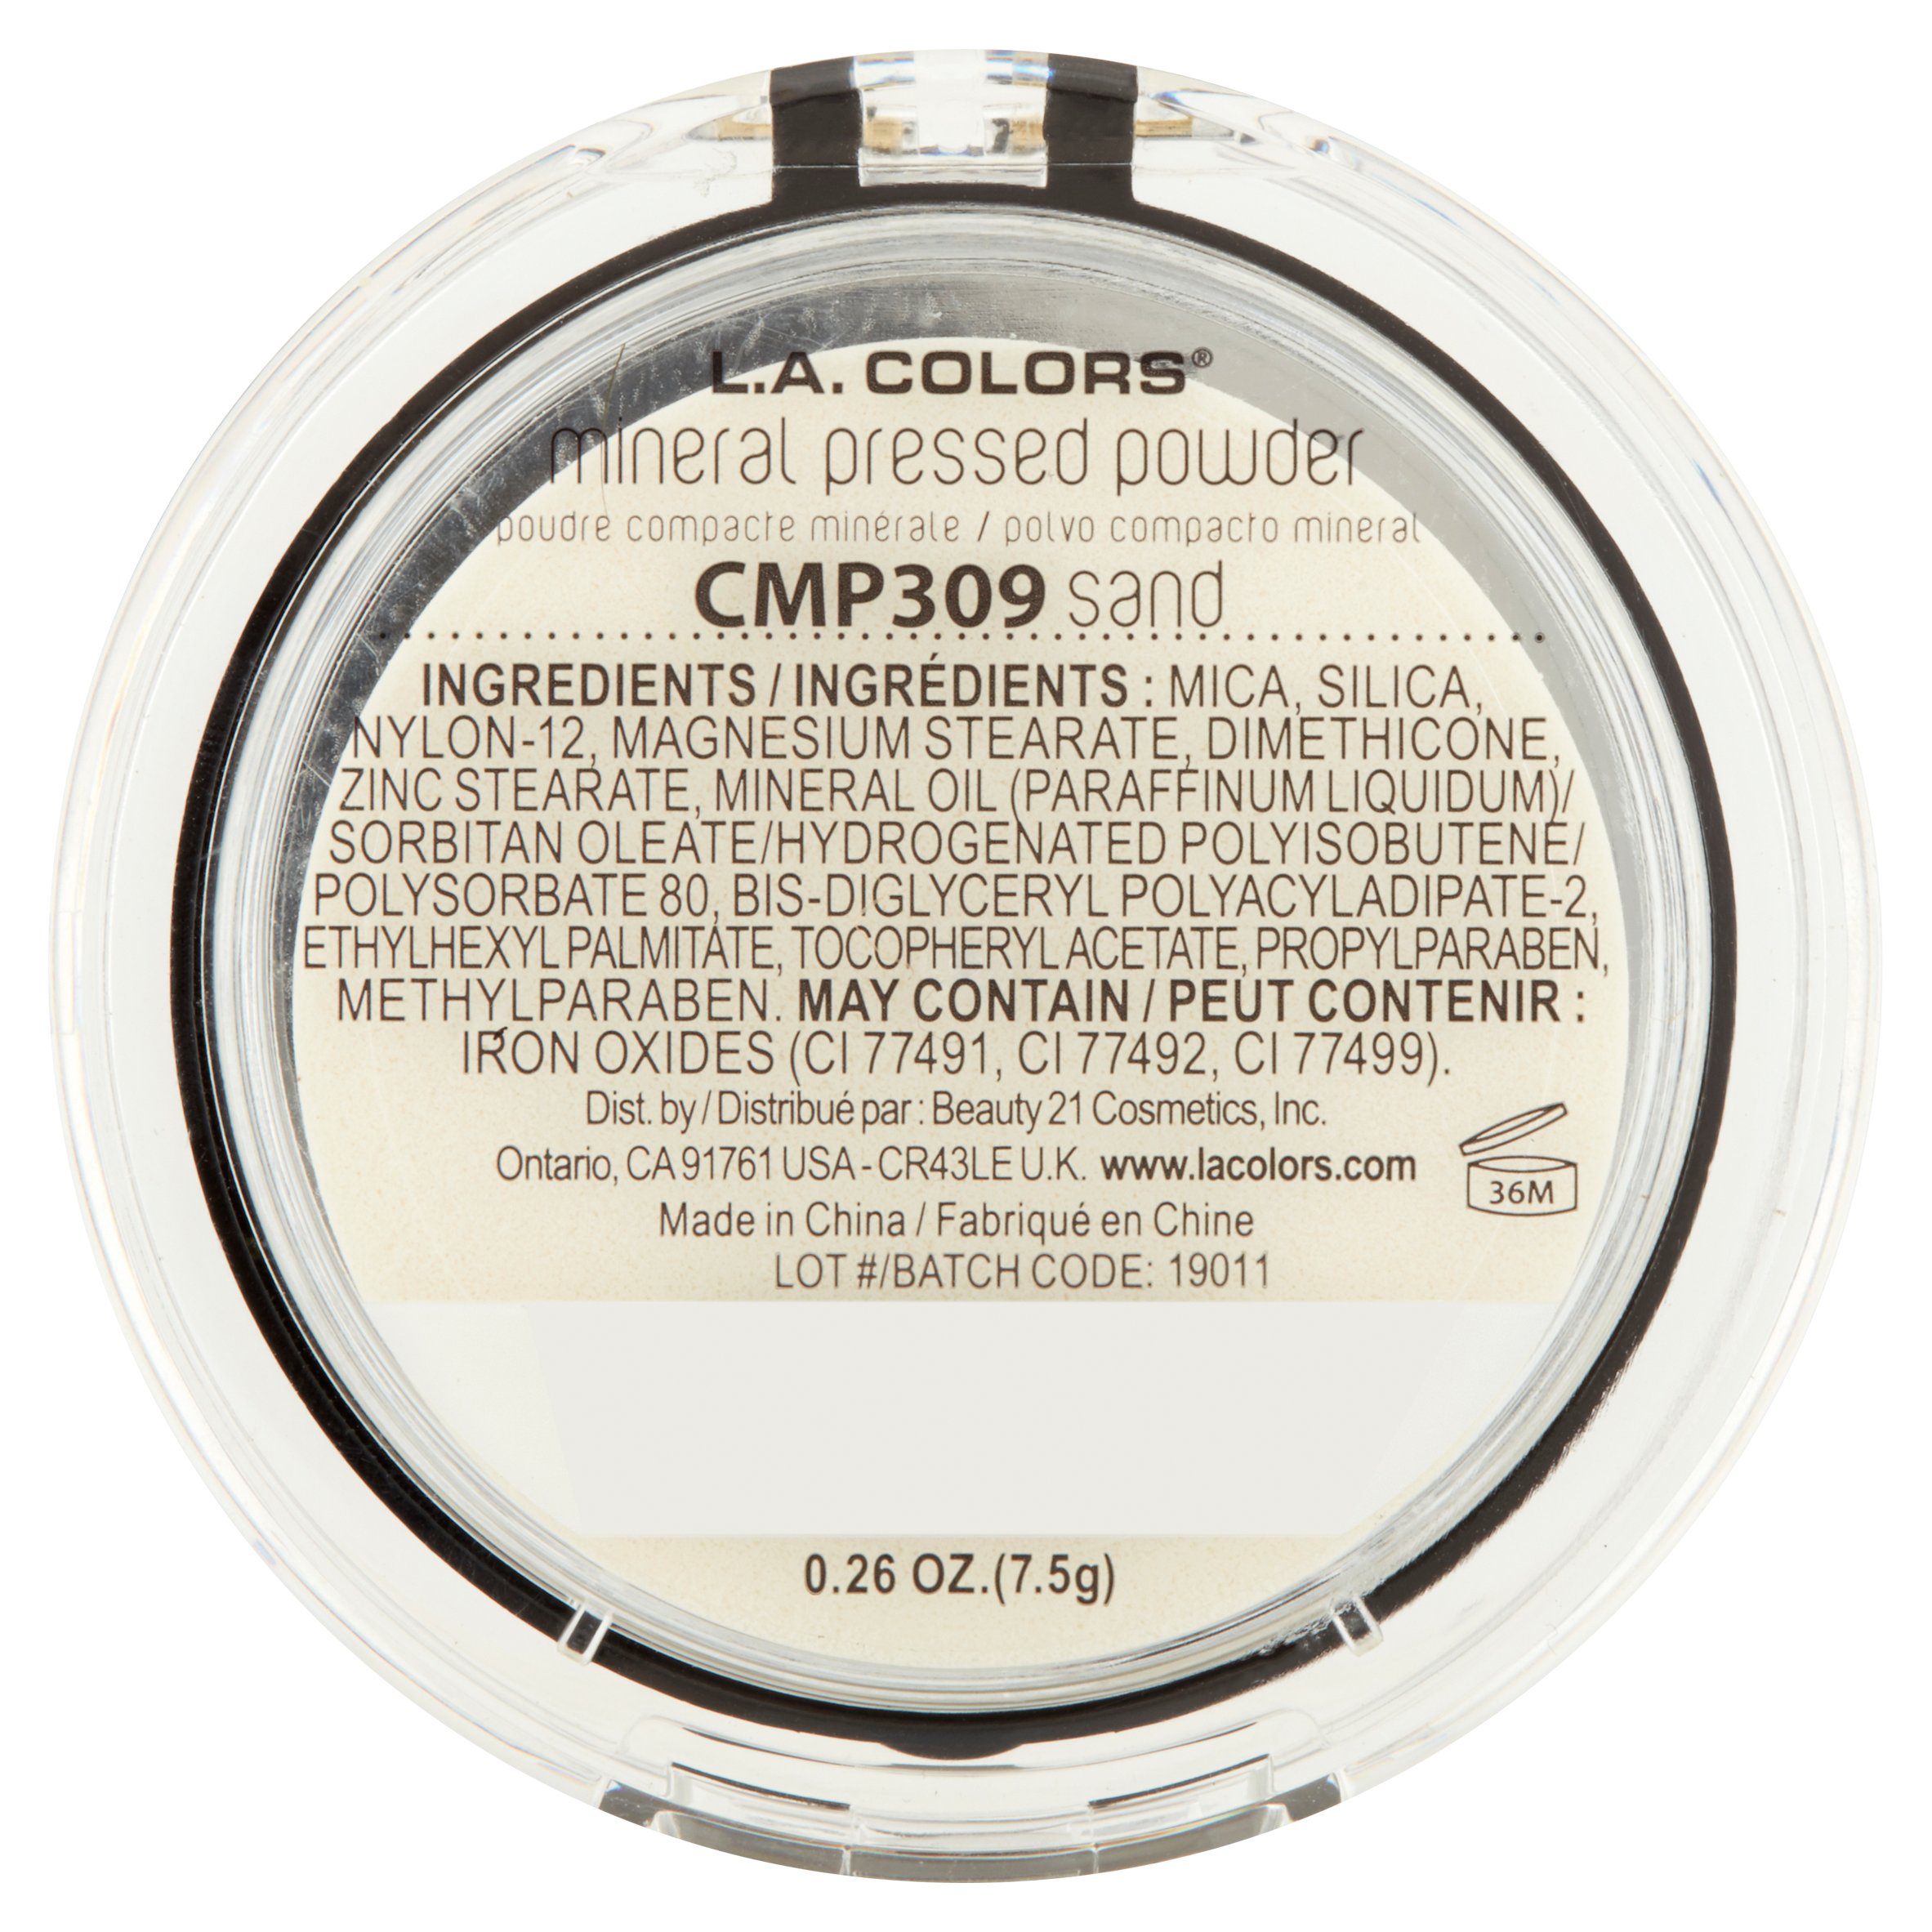 L.A. Colors Mineral Pressed Powder, Sand - image 3 of 4